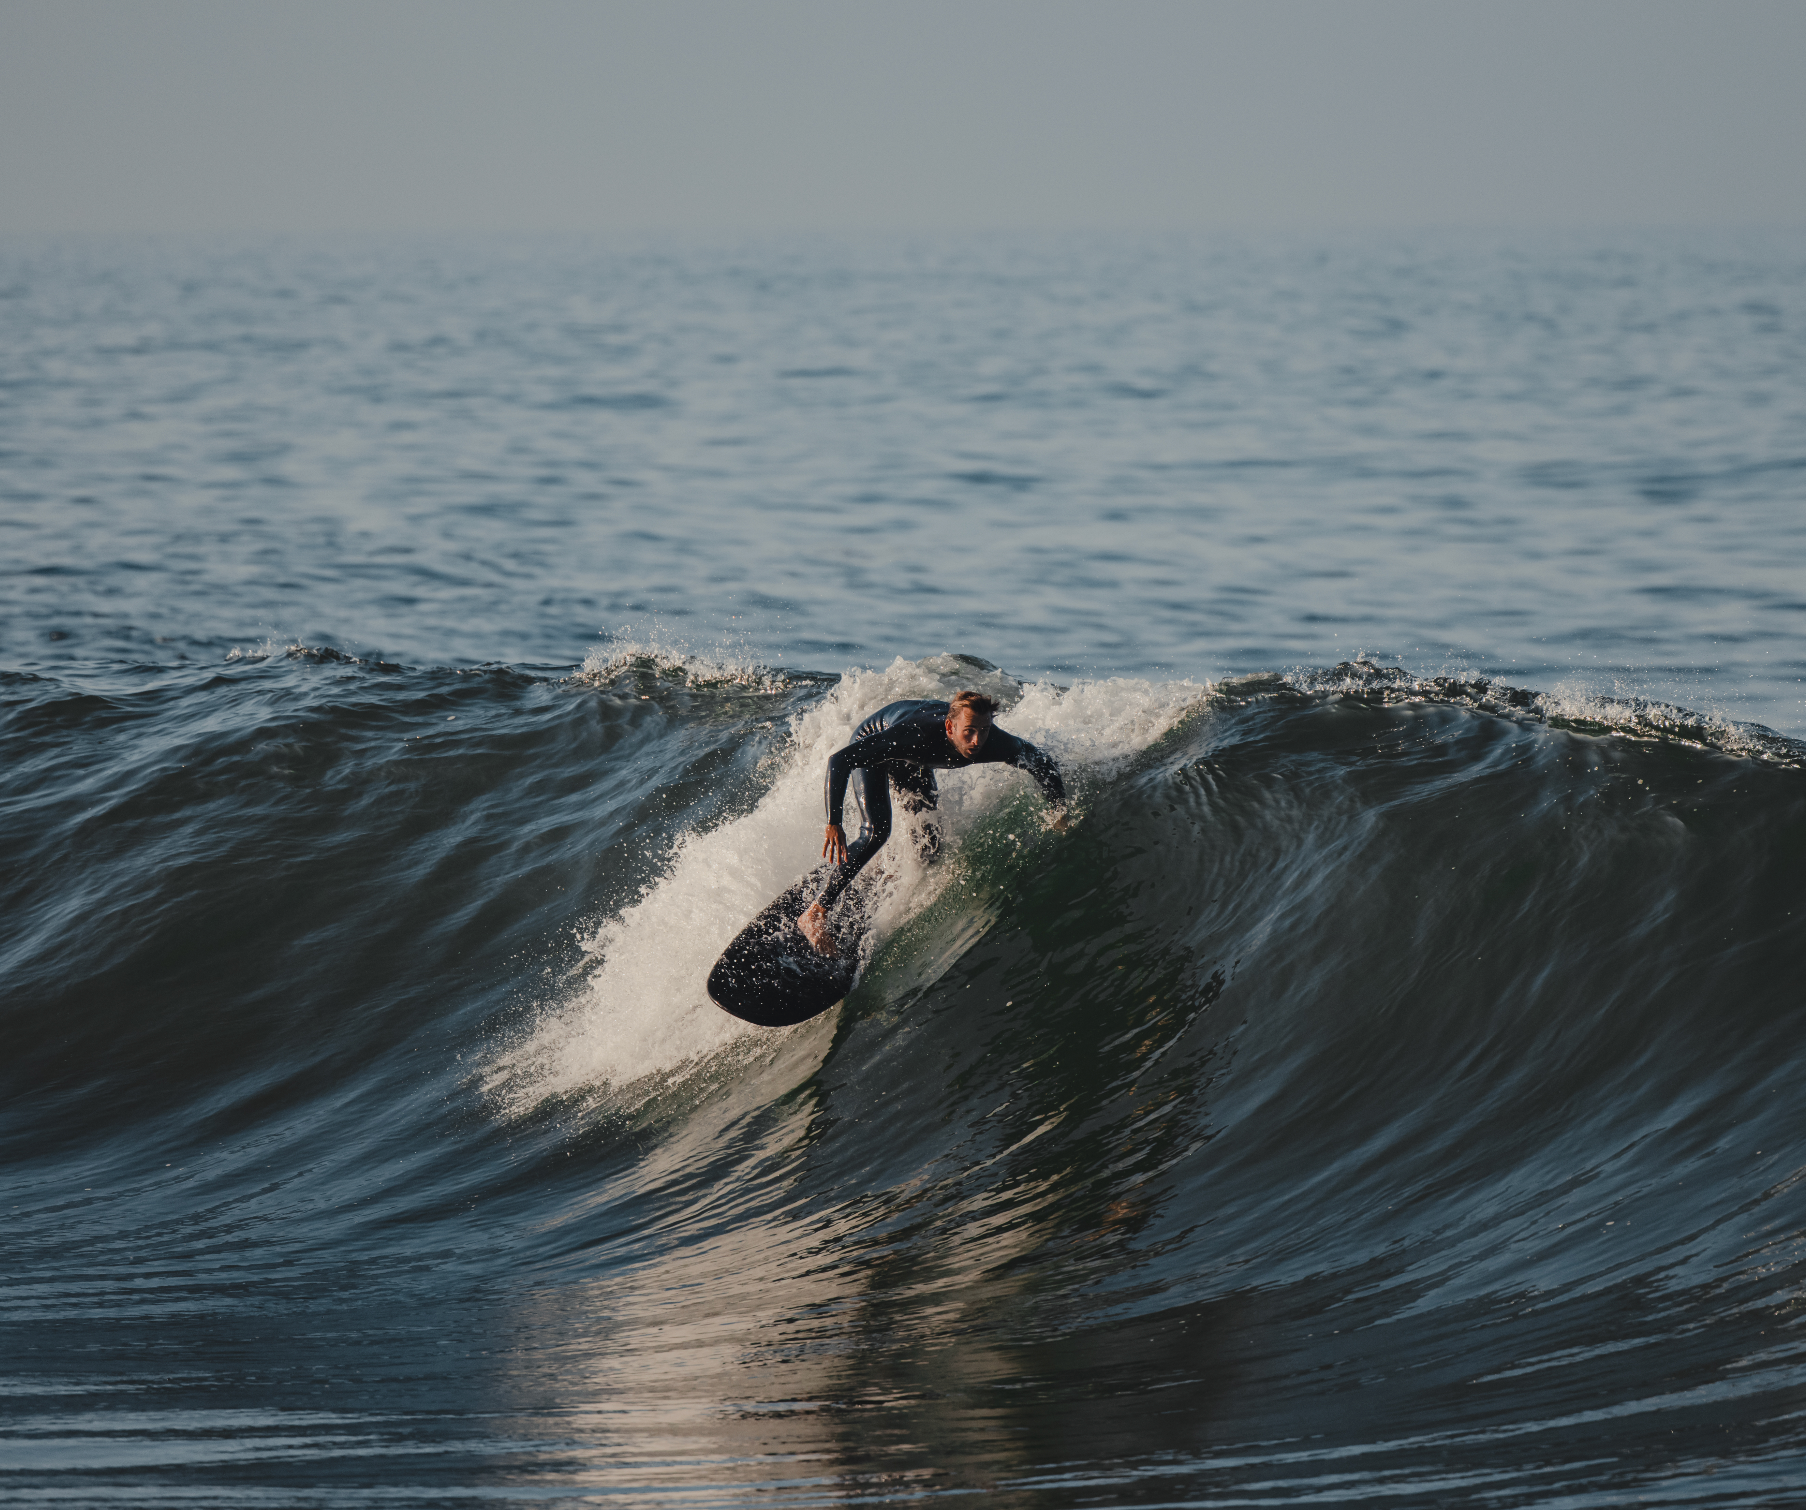 A man surfing a wave on a black 5 foot 4 inch Almond surfboard 